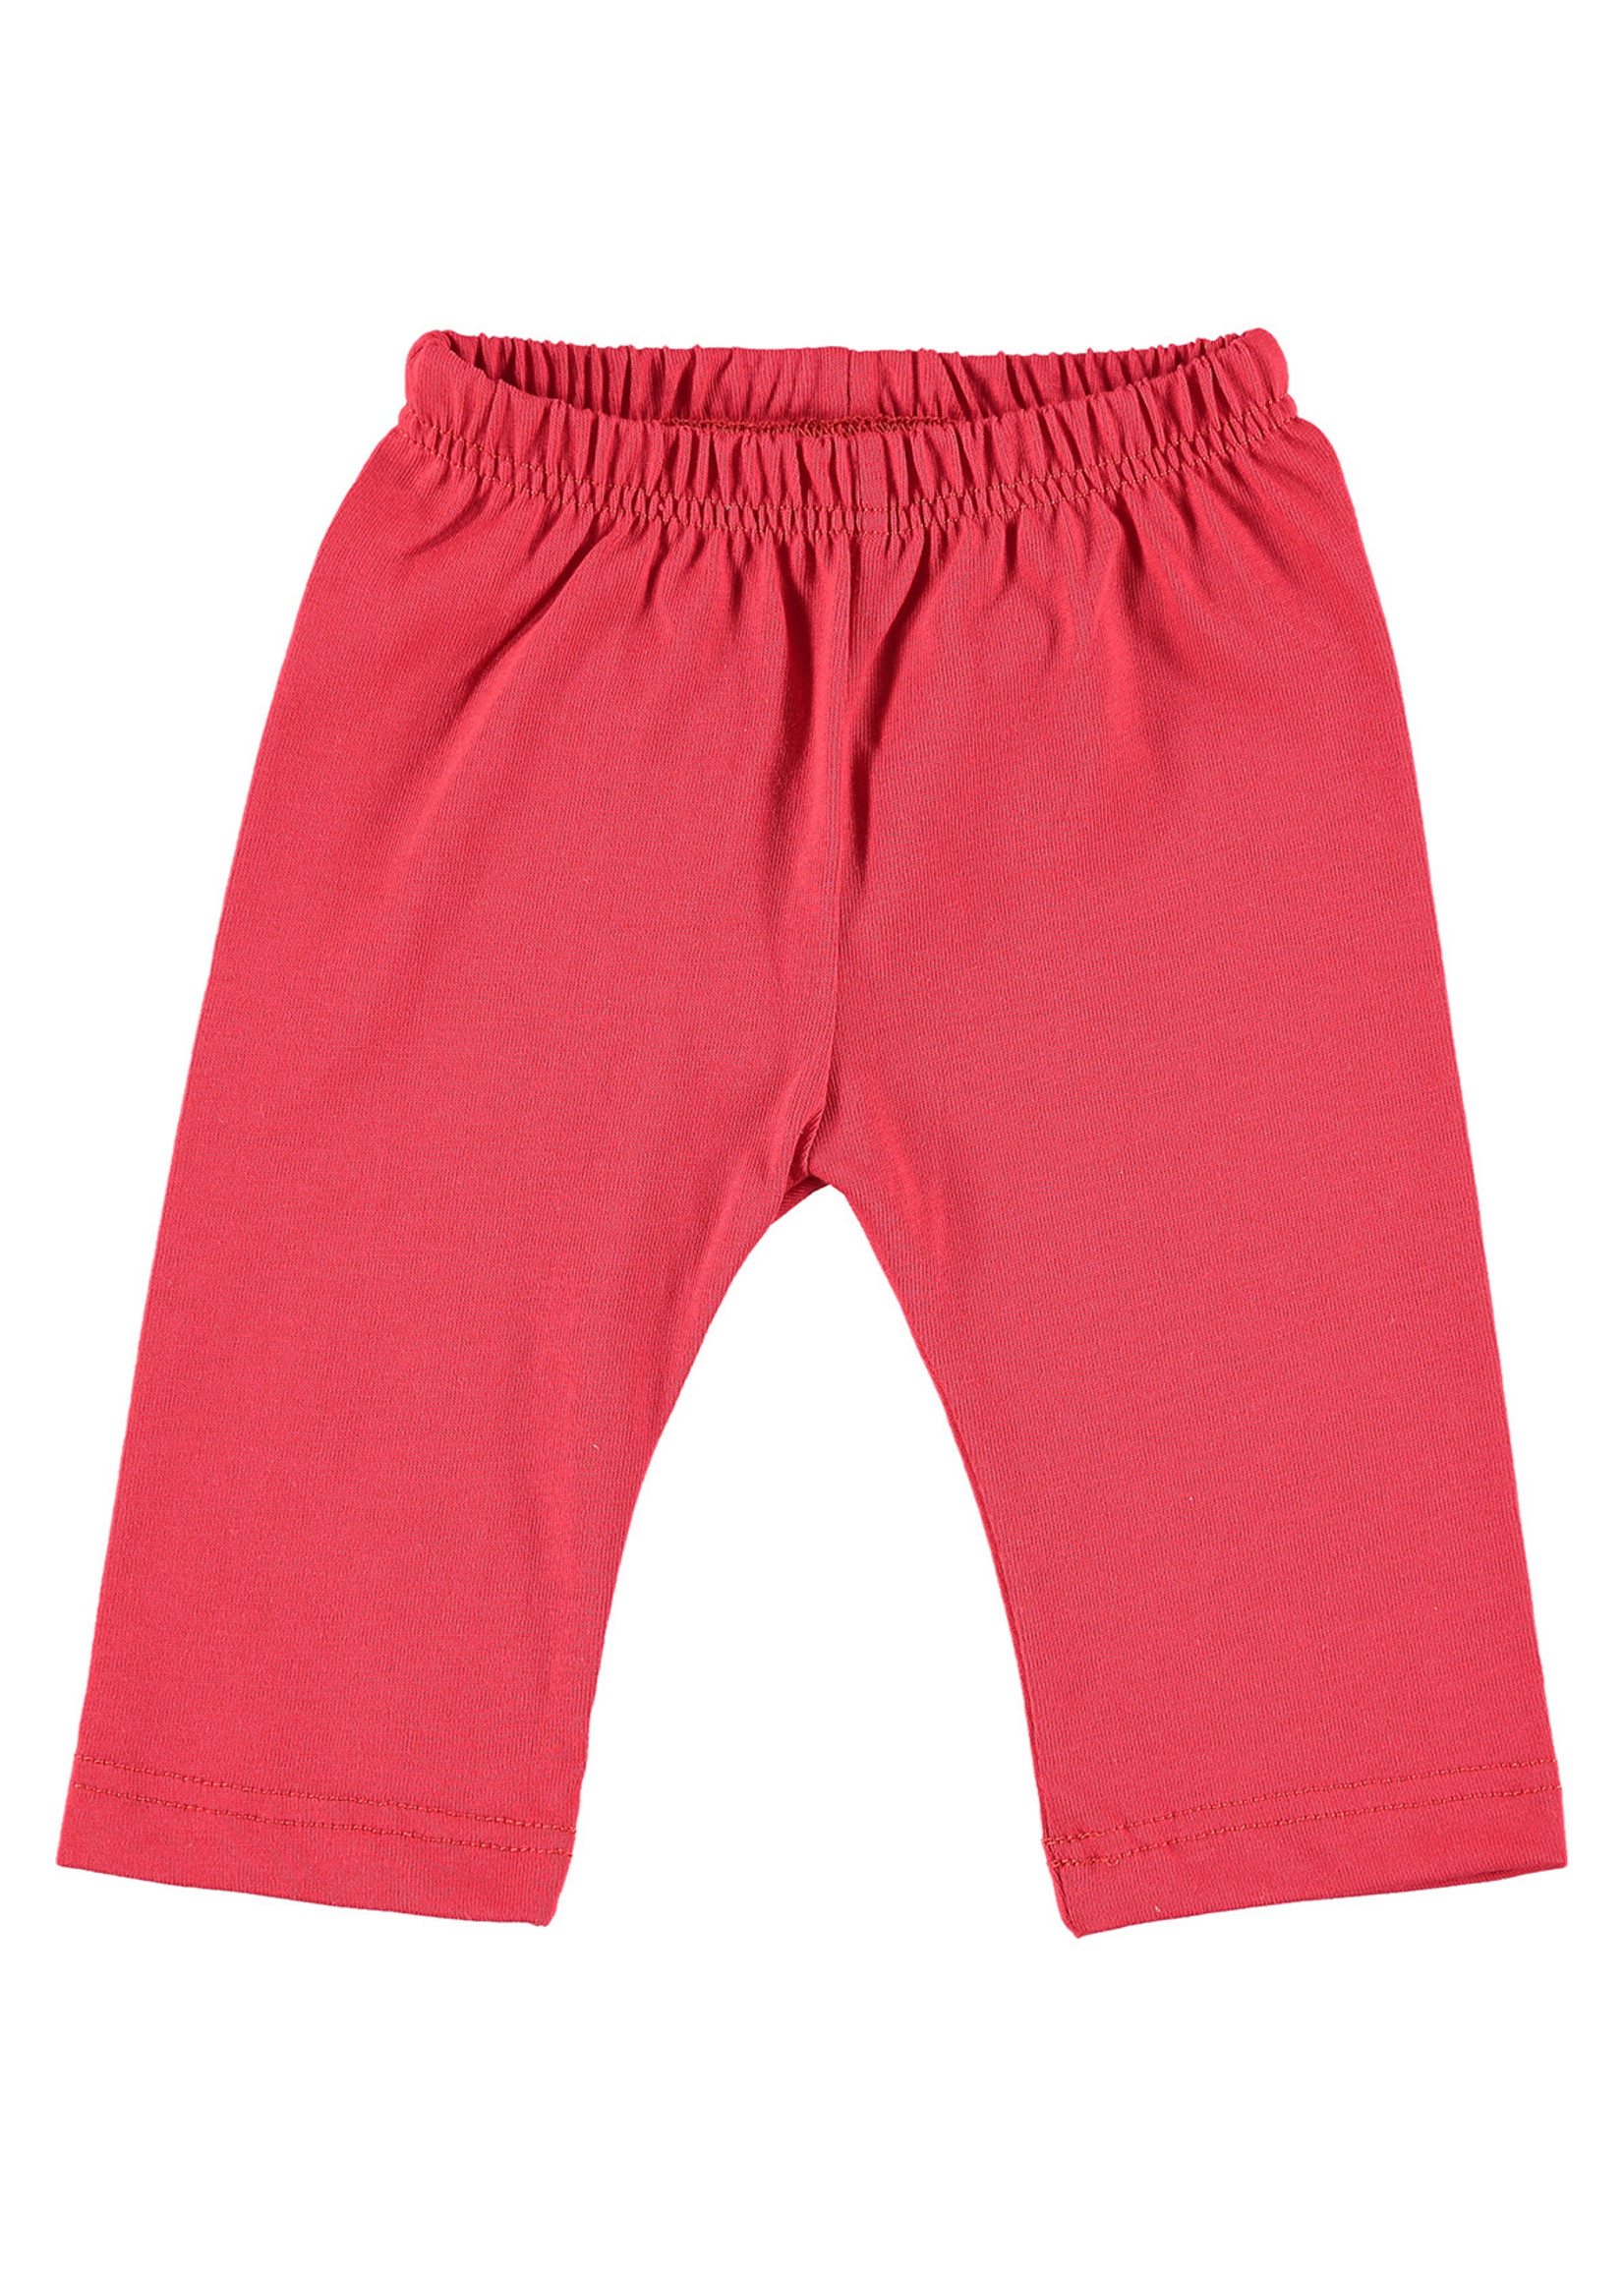 Limo basics Jersey summer trousers red 62-68